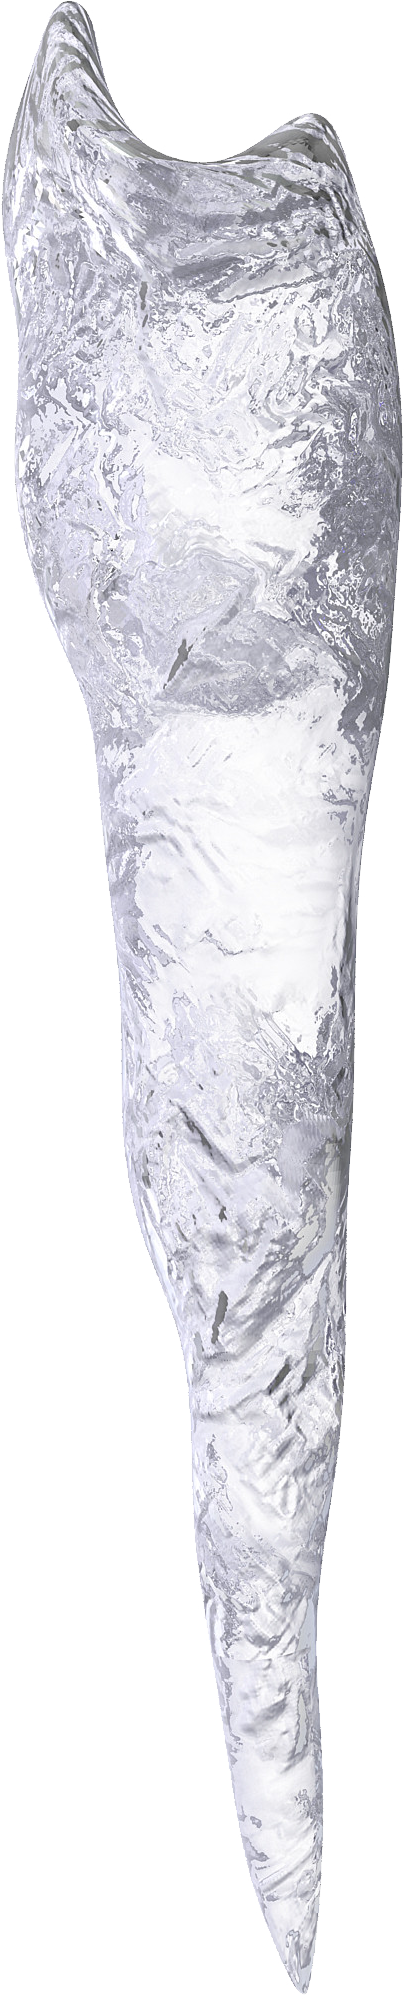 Icicles PNG images Download